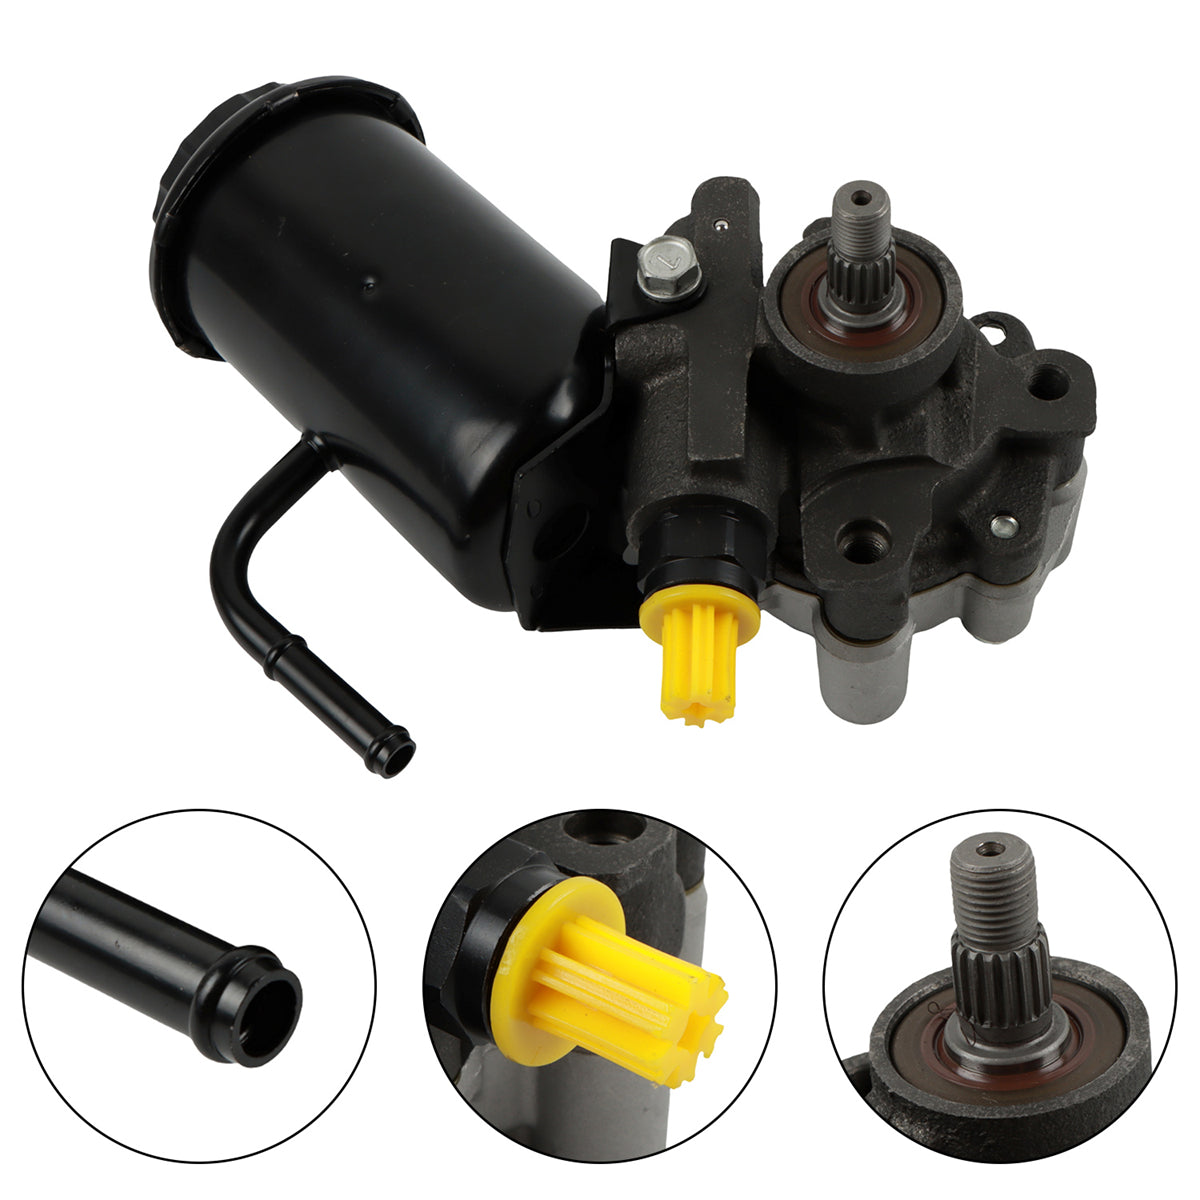 Daysyore® Power Steering Pump With Resevoir 21-5229 for 1995-2004 Toyota Tacoma 4Runner 3.4L